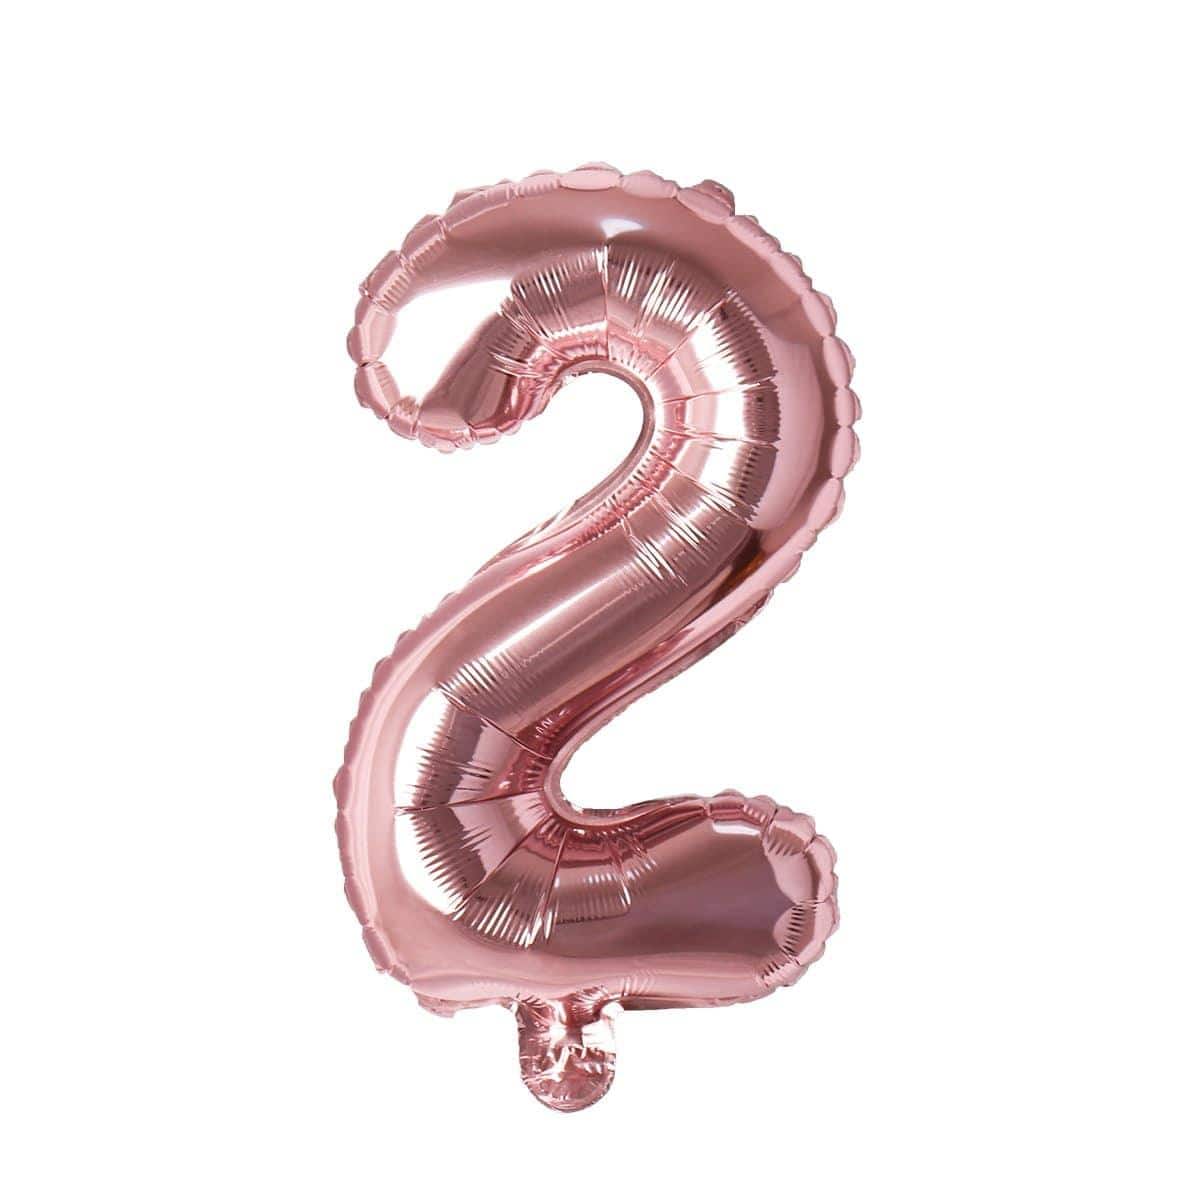 Buy Balloons Rose Gold Number 2 Foil Balloon, 16 Inches sold at Party Expert